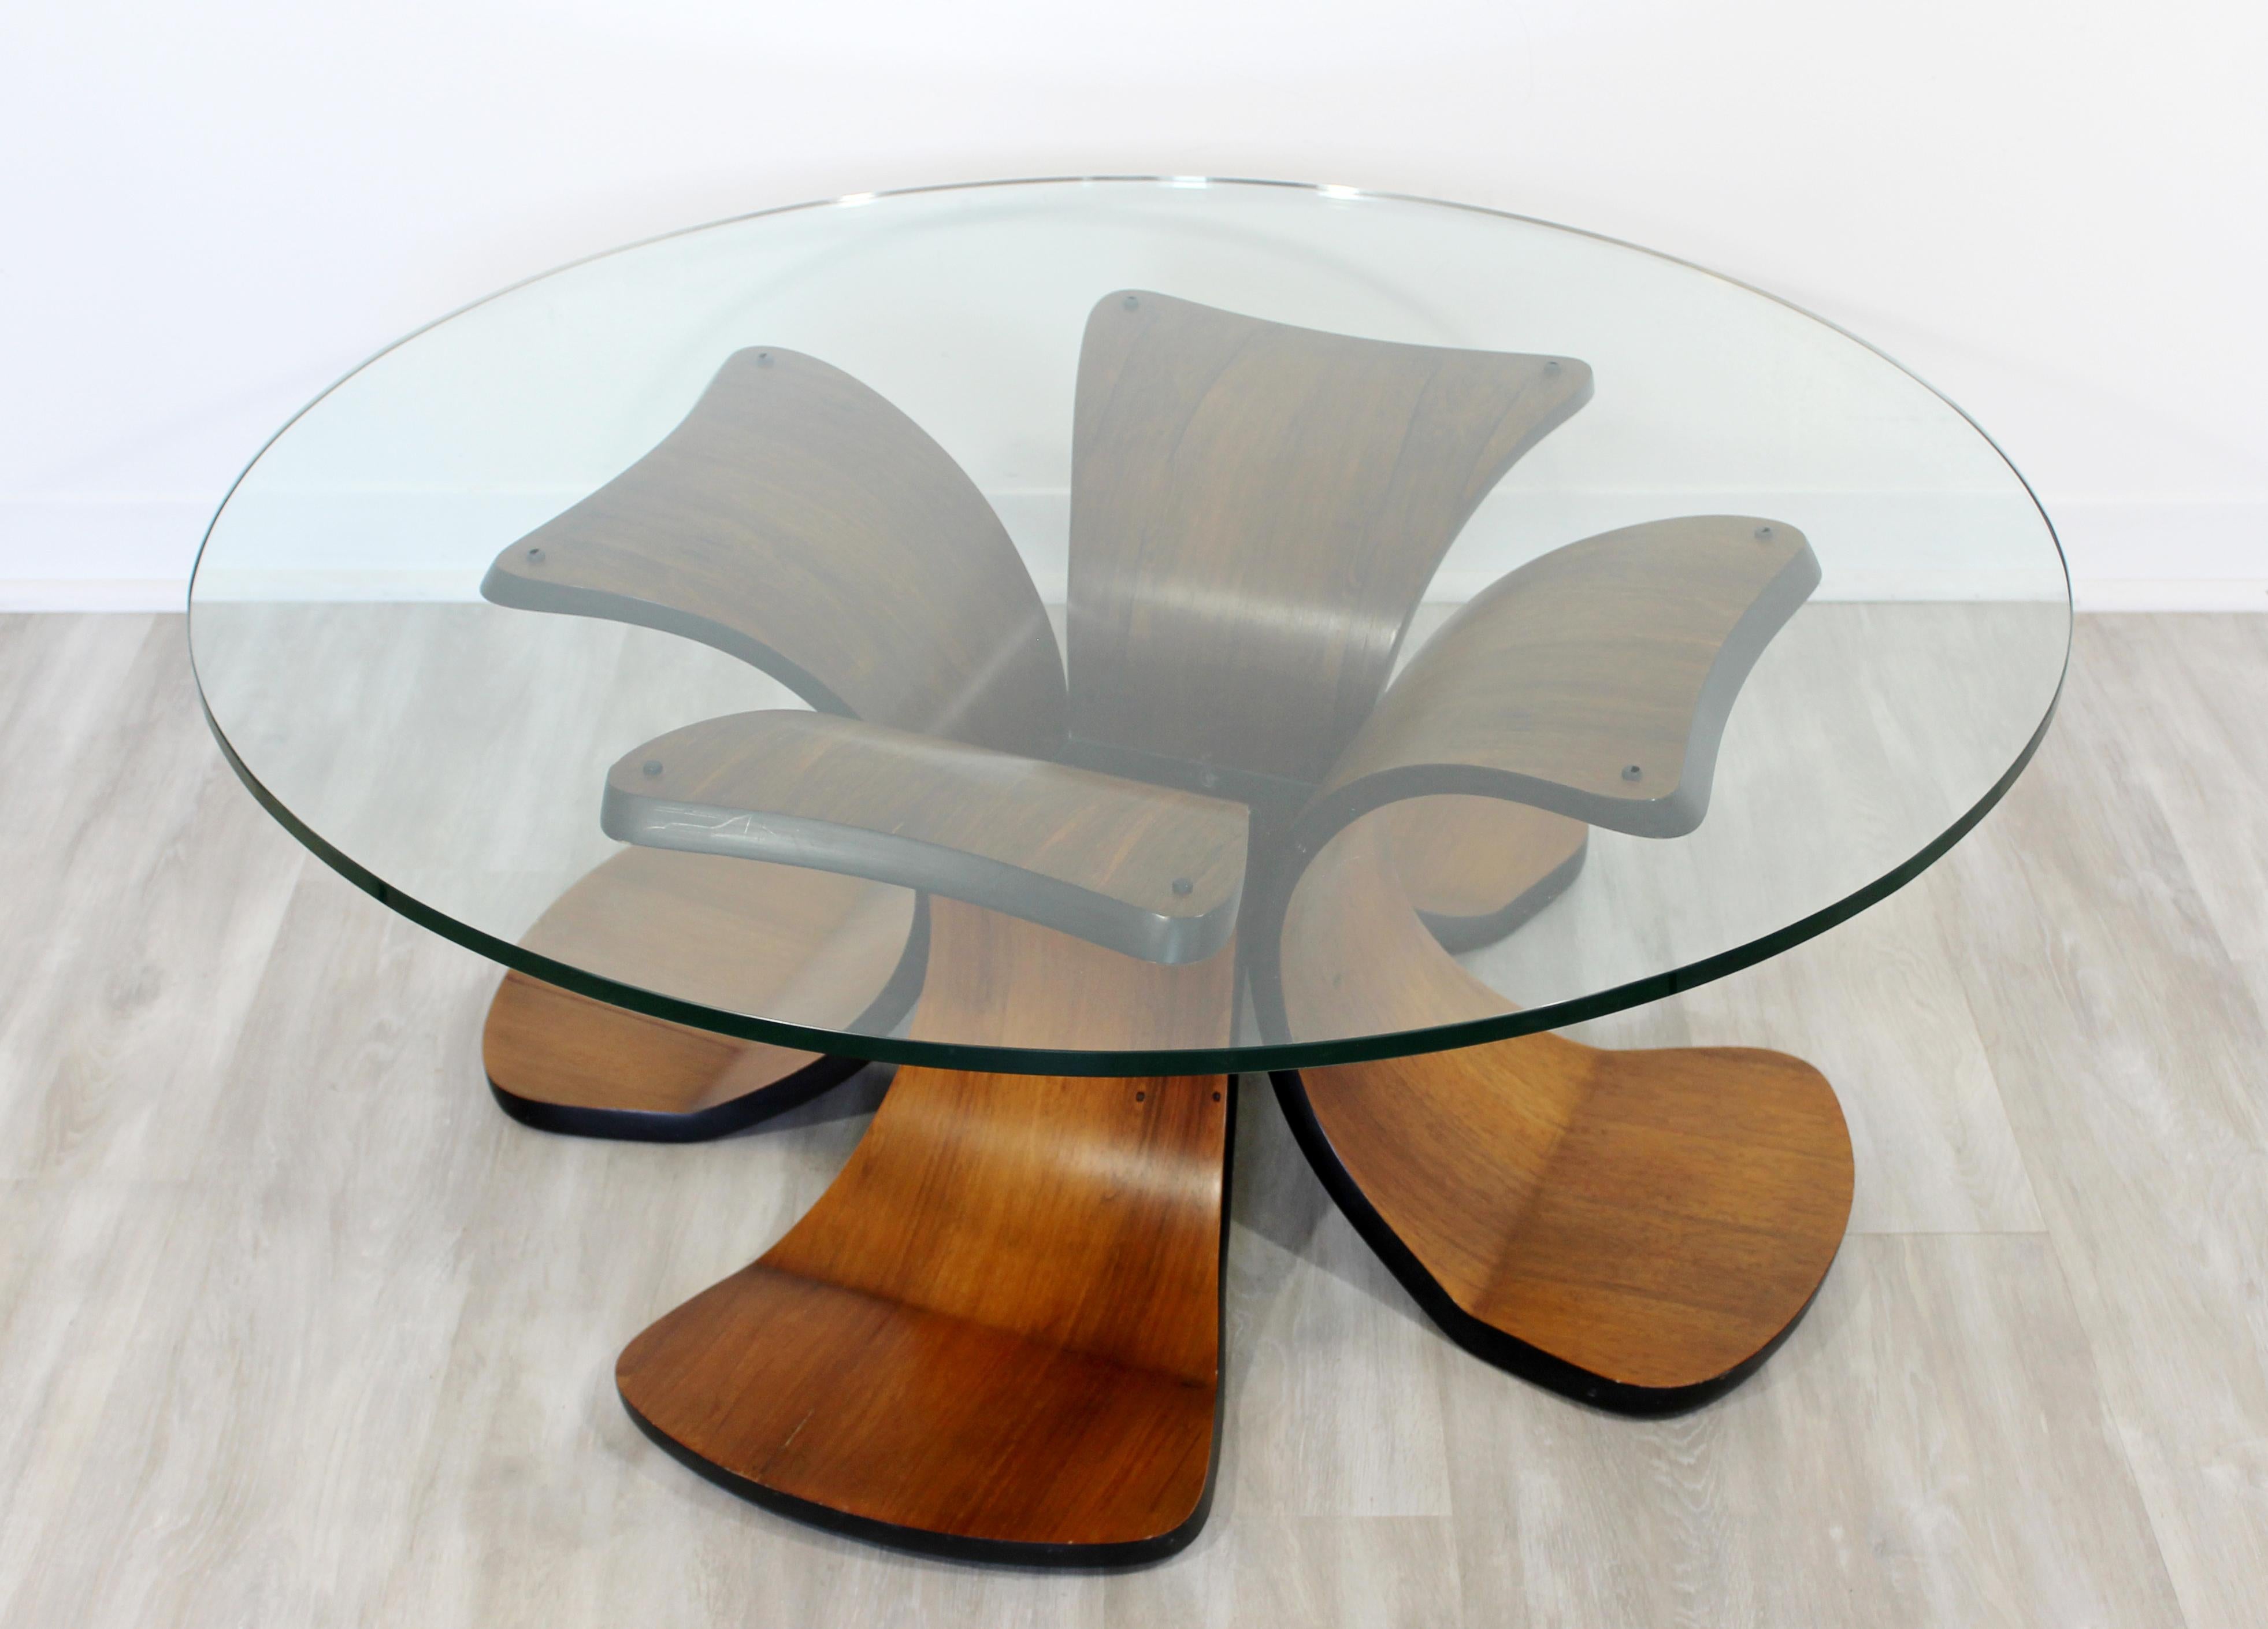 For your consideration is a phenomenal, rosewood and walnut coffee table with a round glass top, circa 1960s. In very good vintage condition. The dimensions are 42